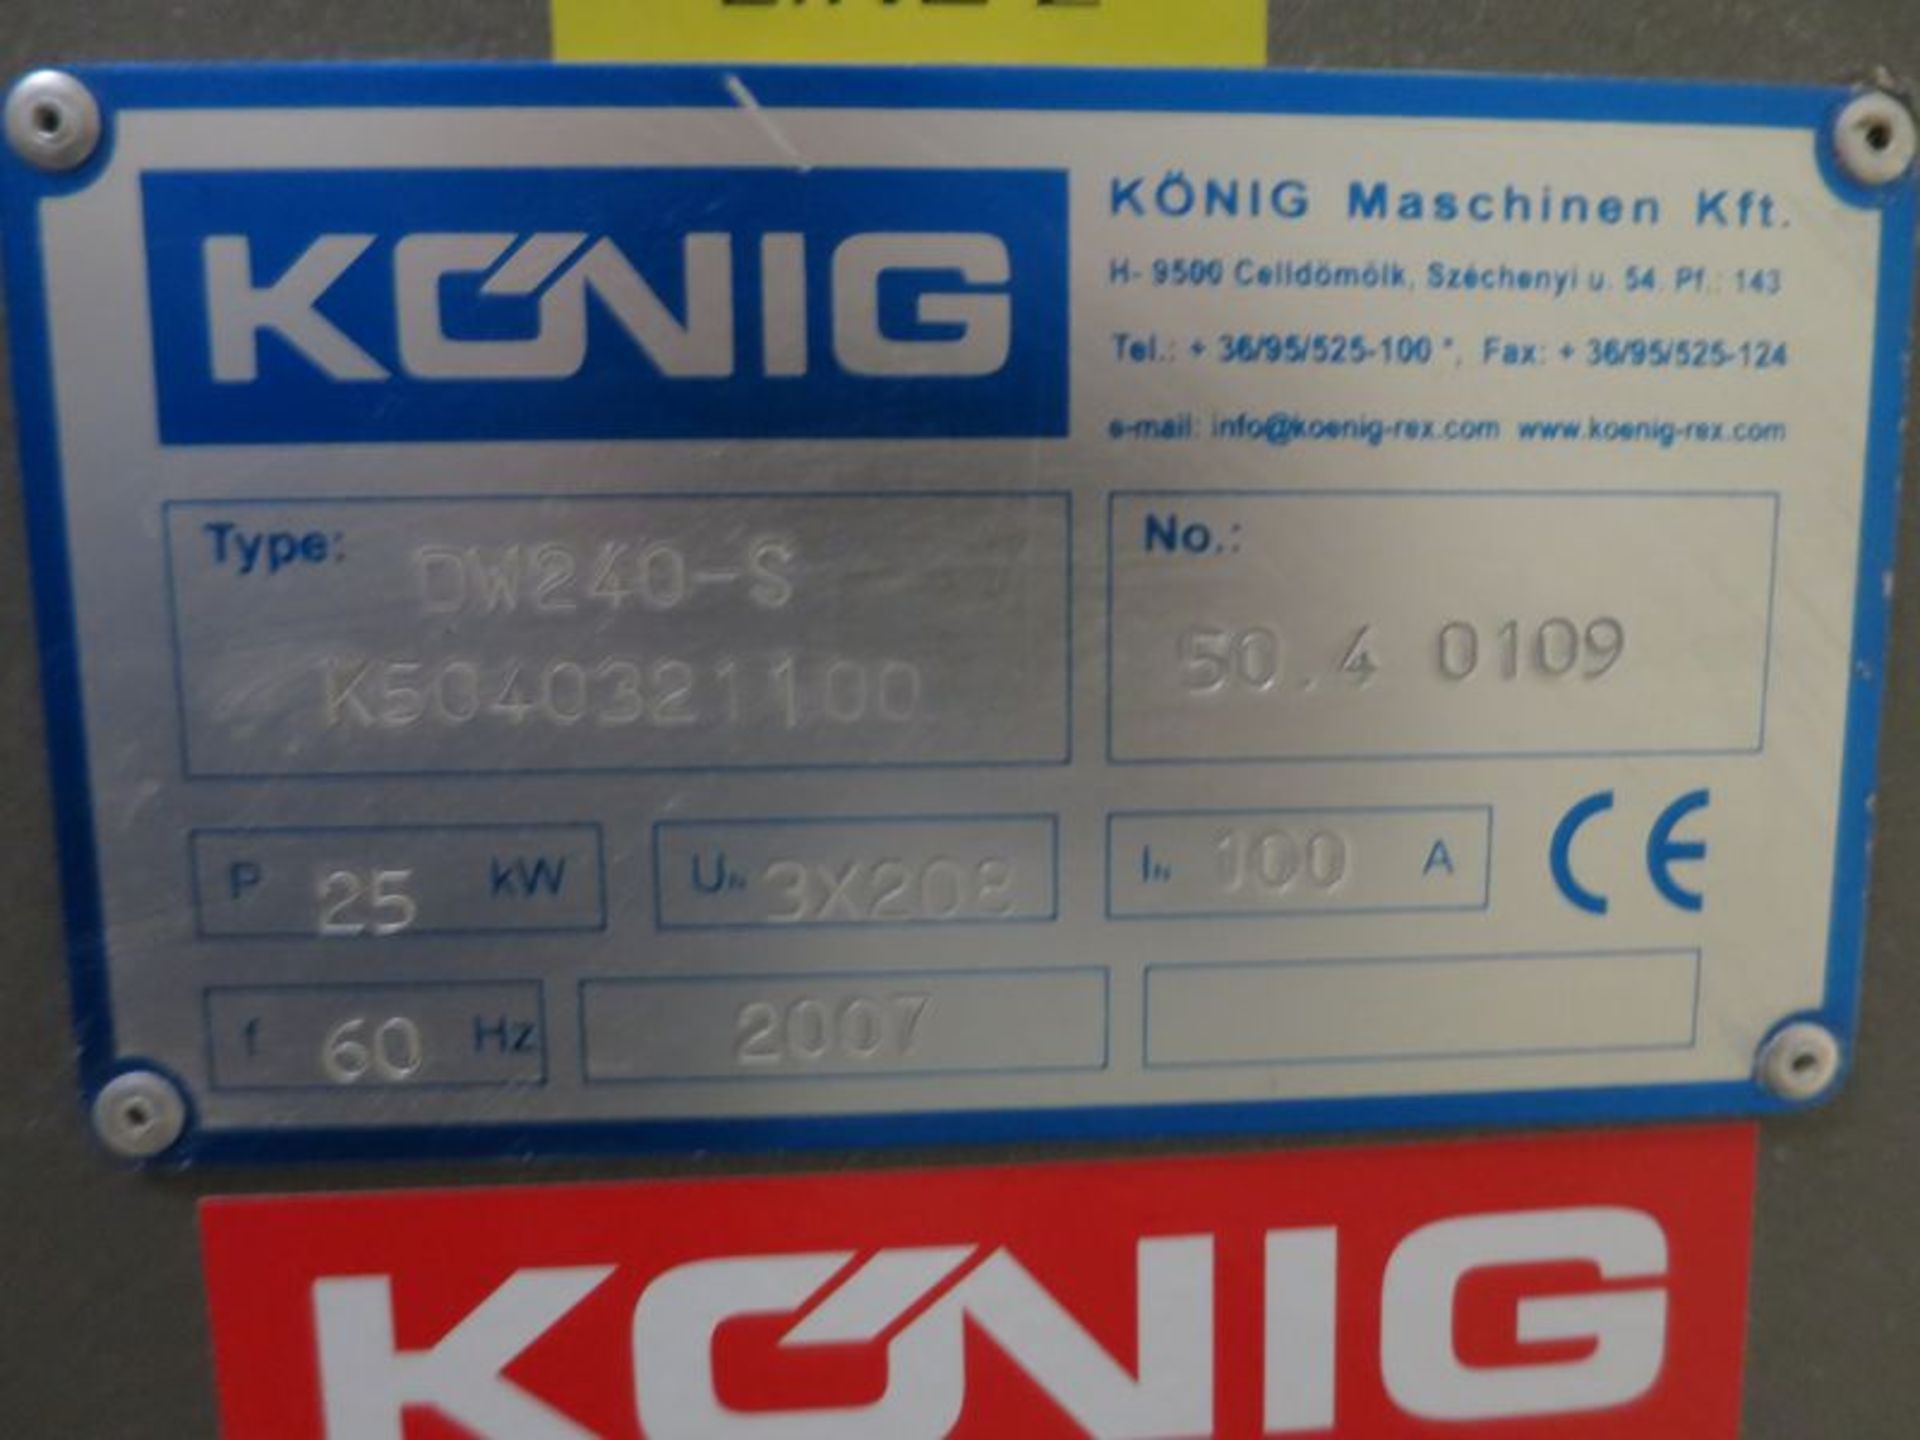 Konig spiral mixer, model DW-240, s/n 50.4 0111, mfg 2007, touch pad control, wall mounted motor - Image 3 of 3